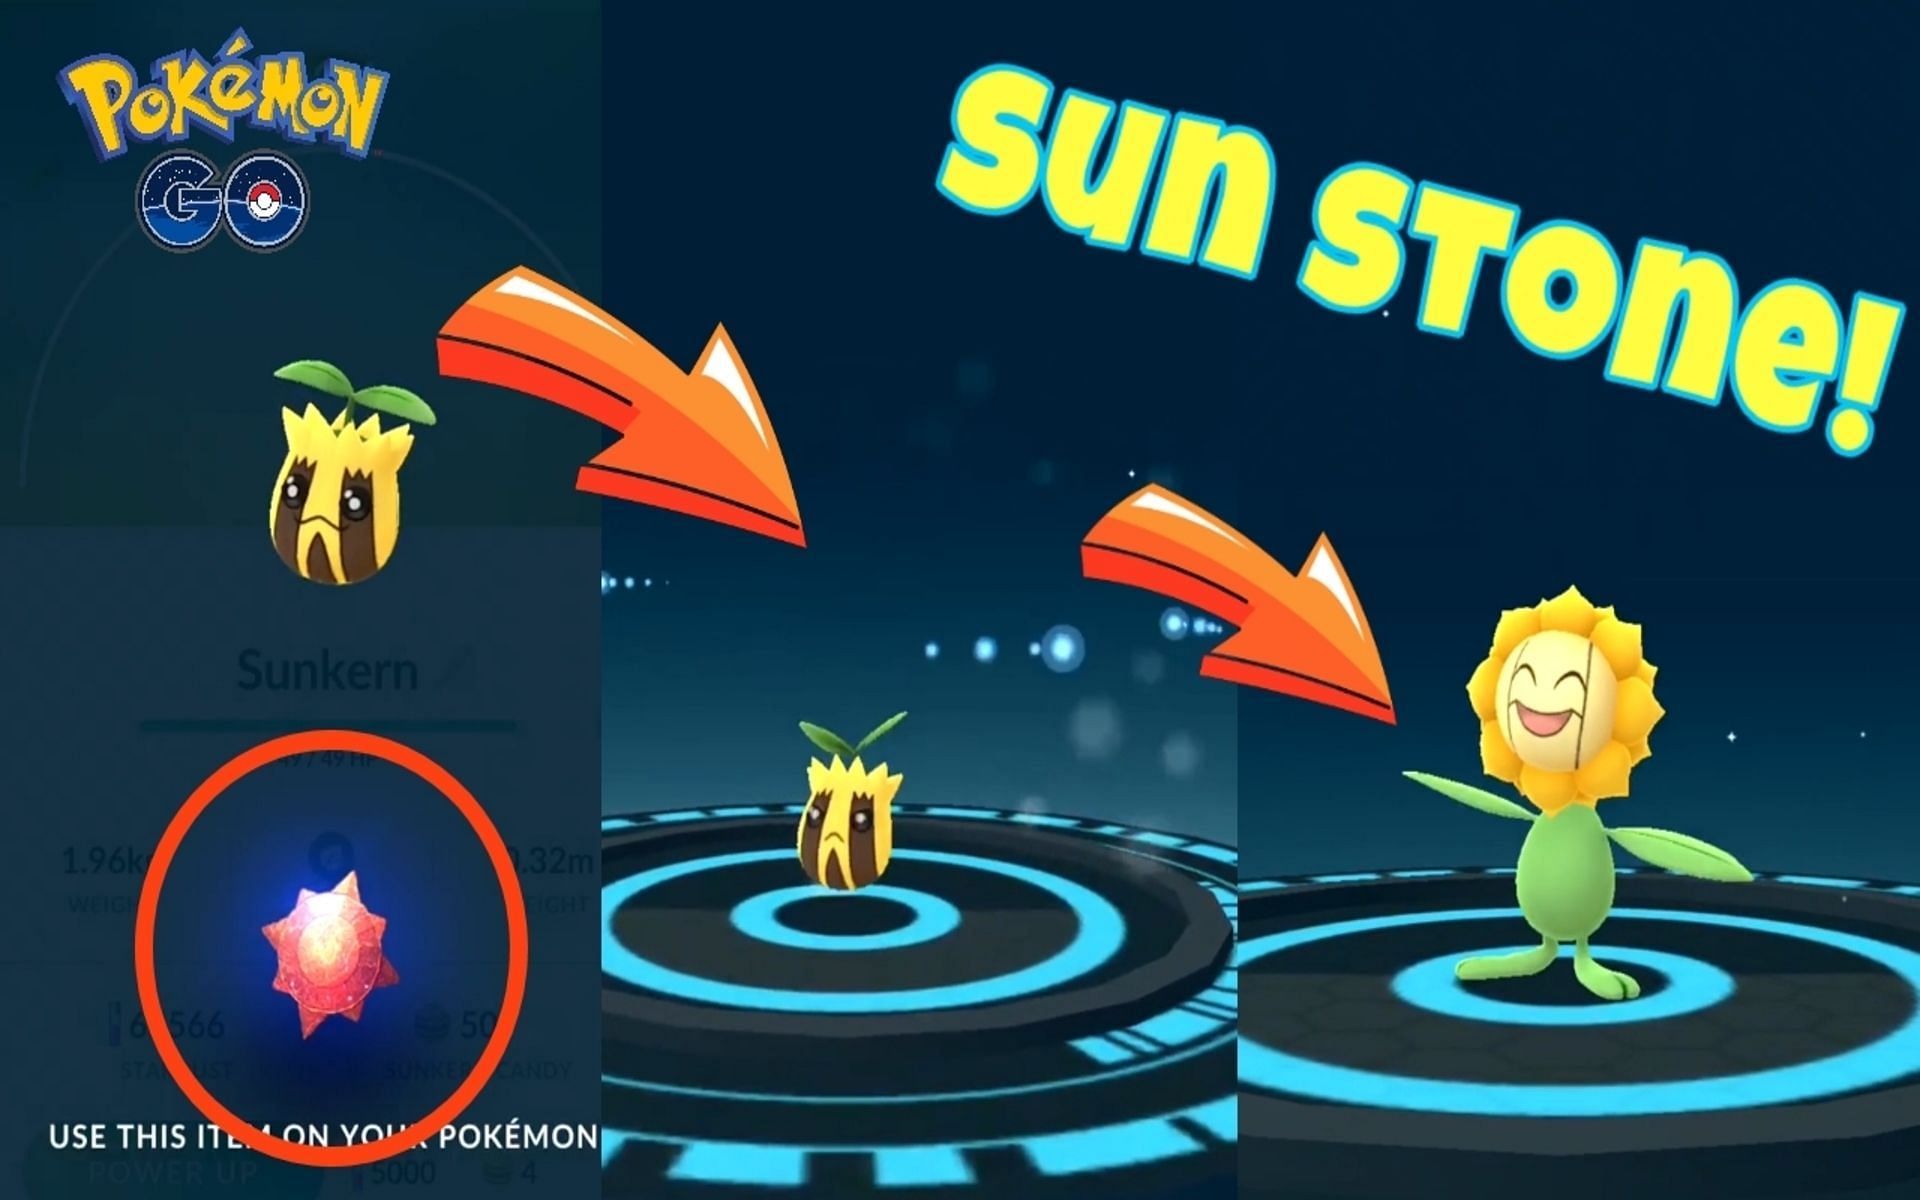 Sunkern can only evolve into Sunflora with a Sun Stone (Image via YouTube/GUARDIAN TV)